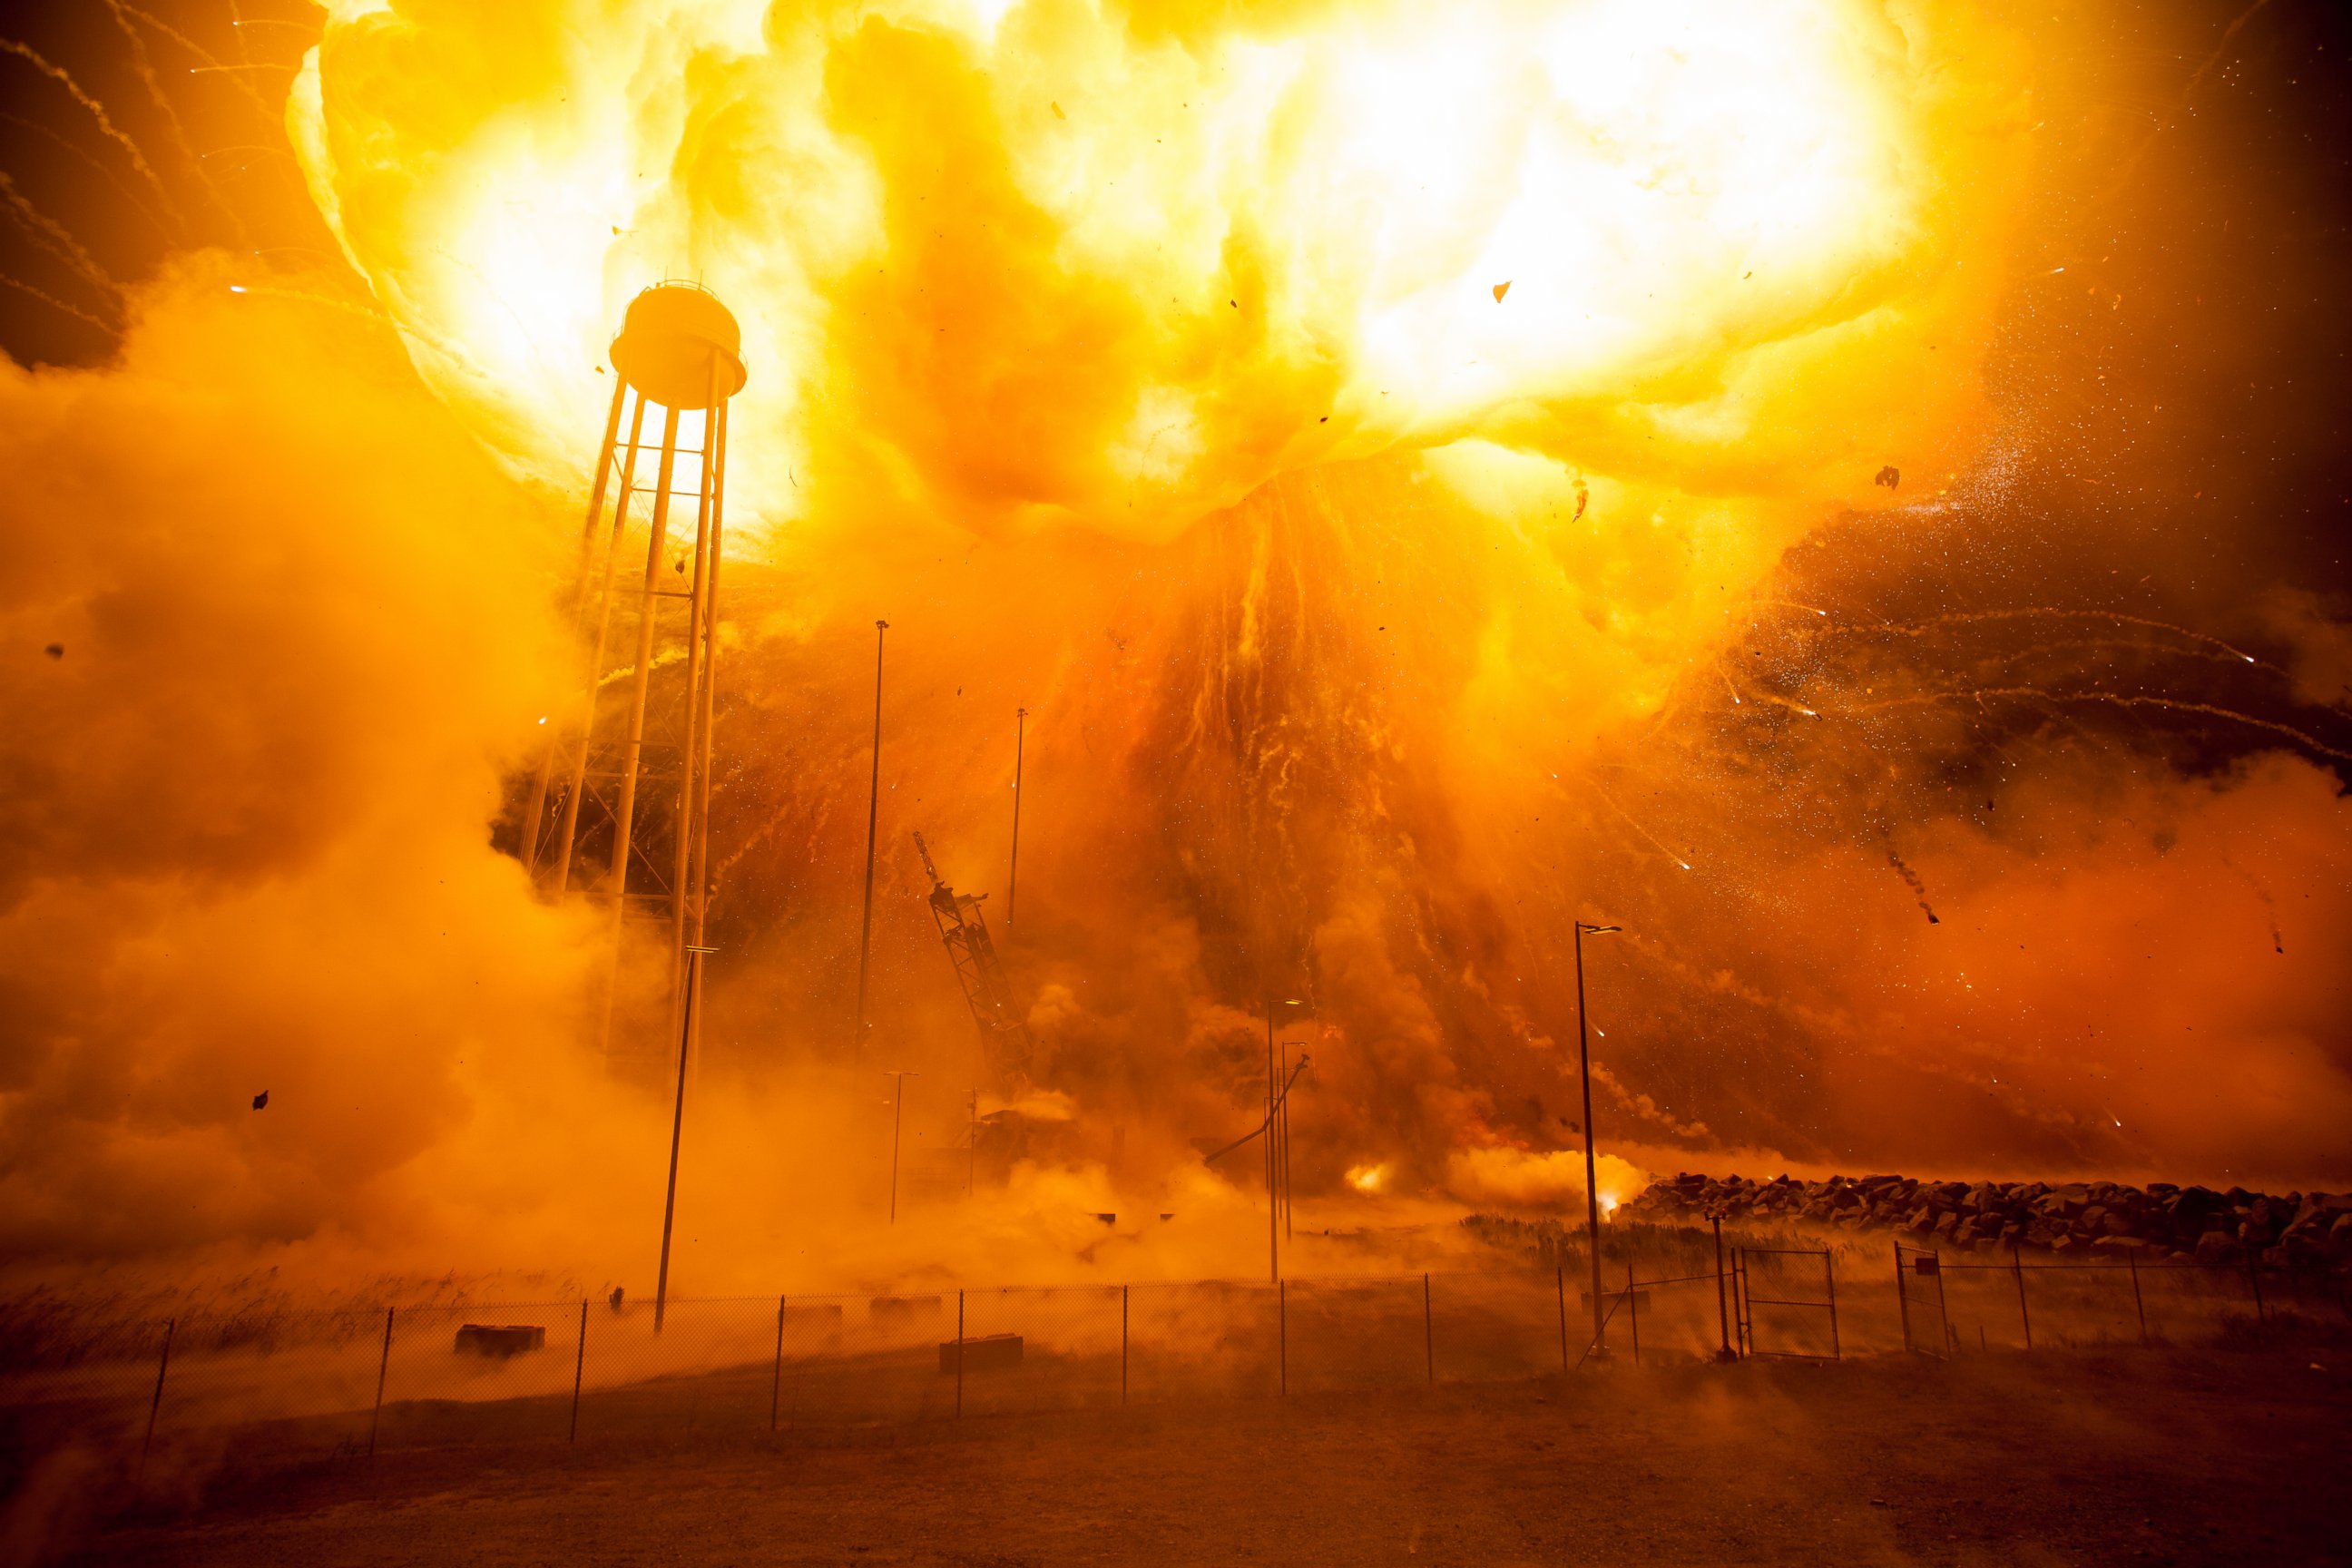 PHOTO: This Oct. 28, 2014 photo provided by NASA shows the Orbital Antares rocket, after it suffered a catastrophic anomaly moments after launch at NASA's Wallops Flight Facility in Virginia. 